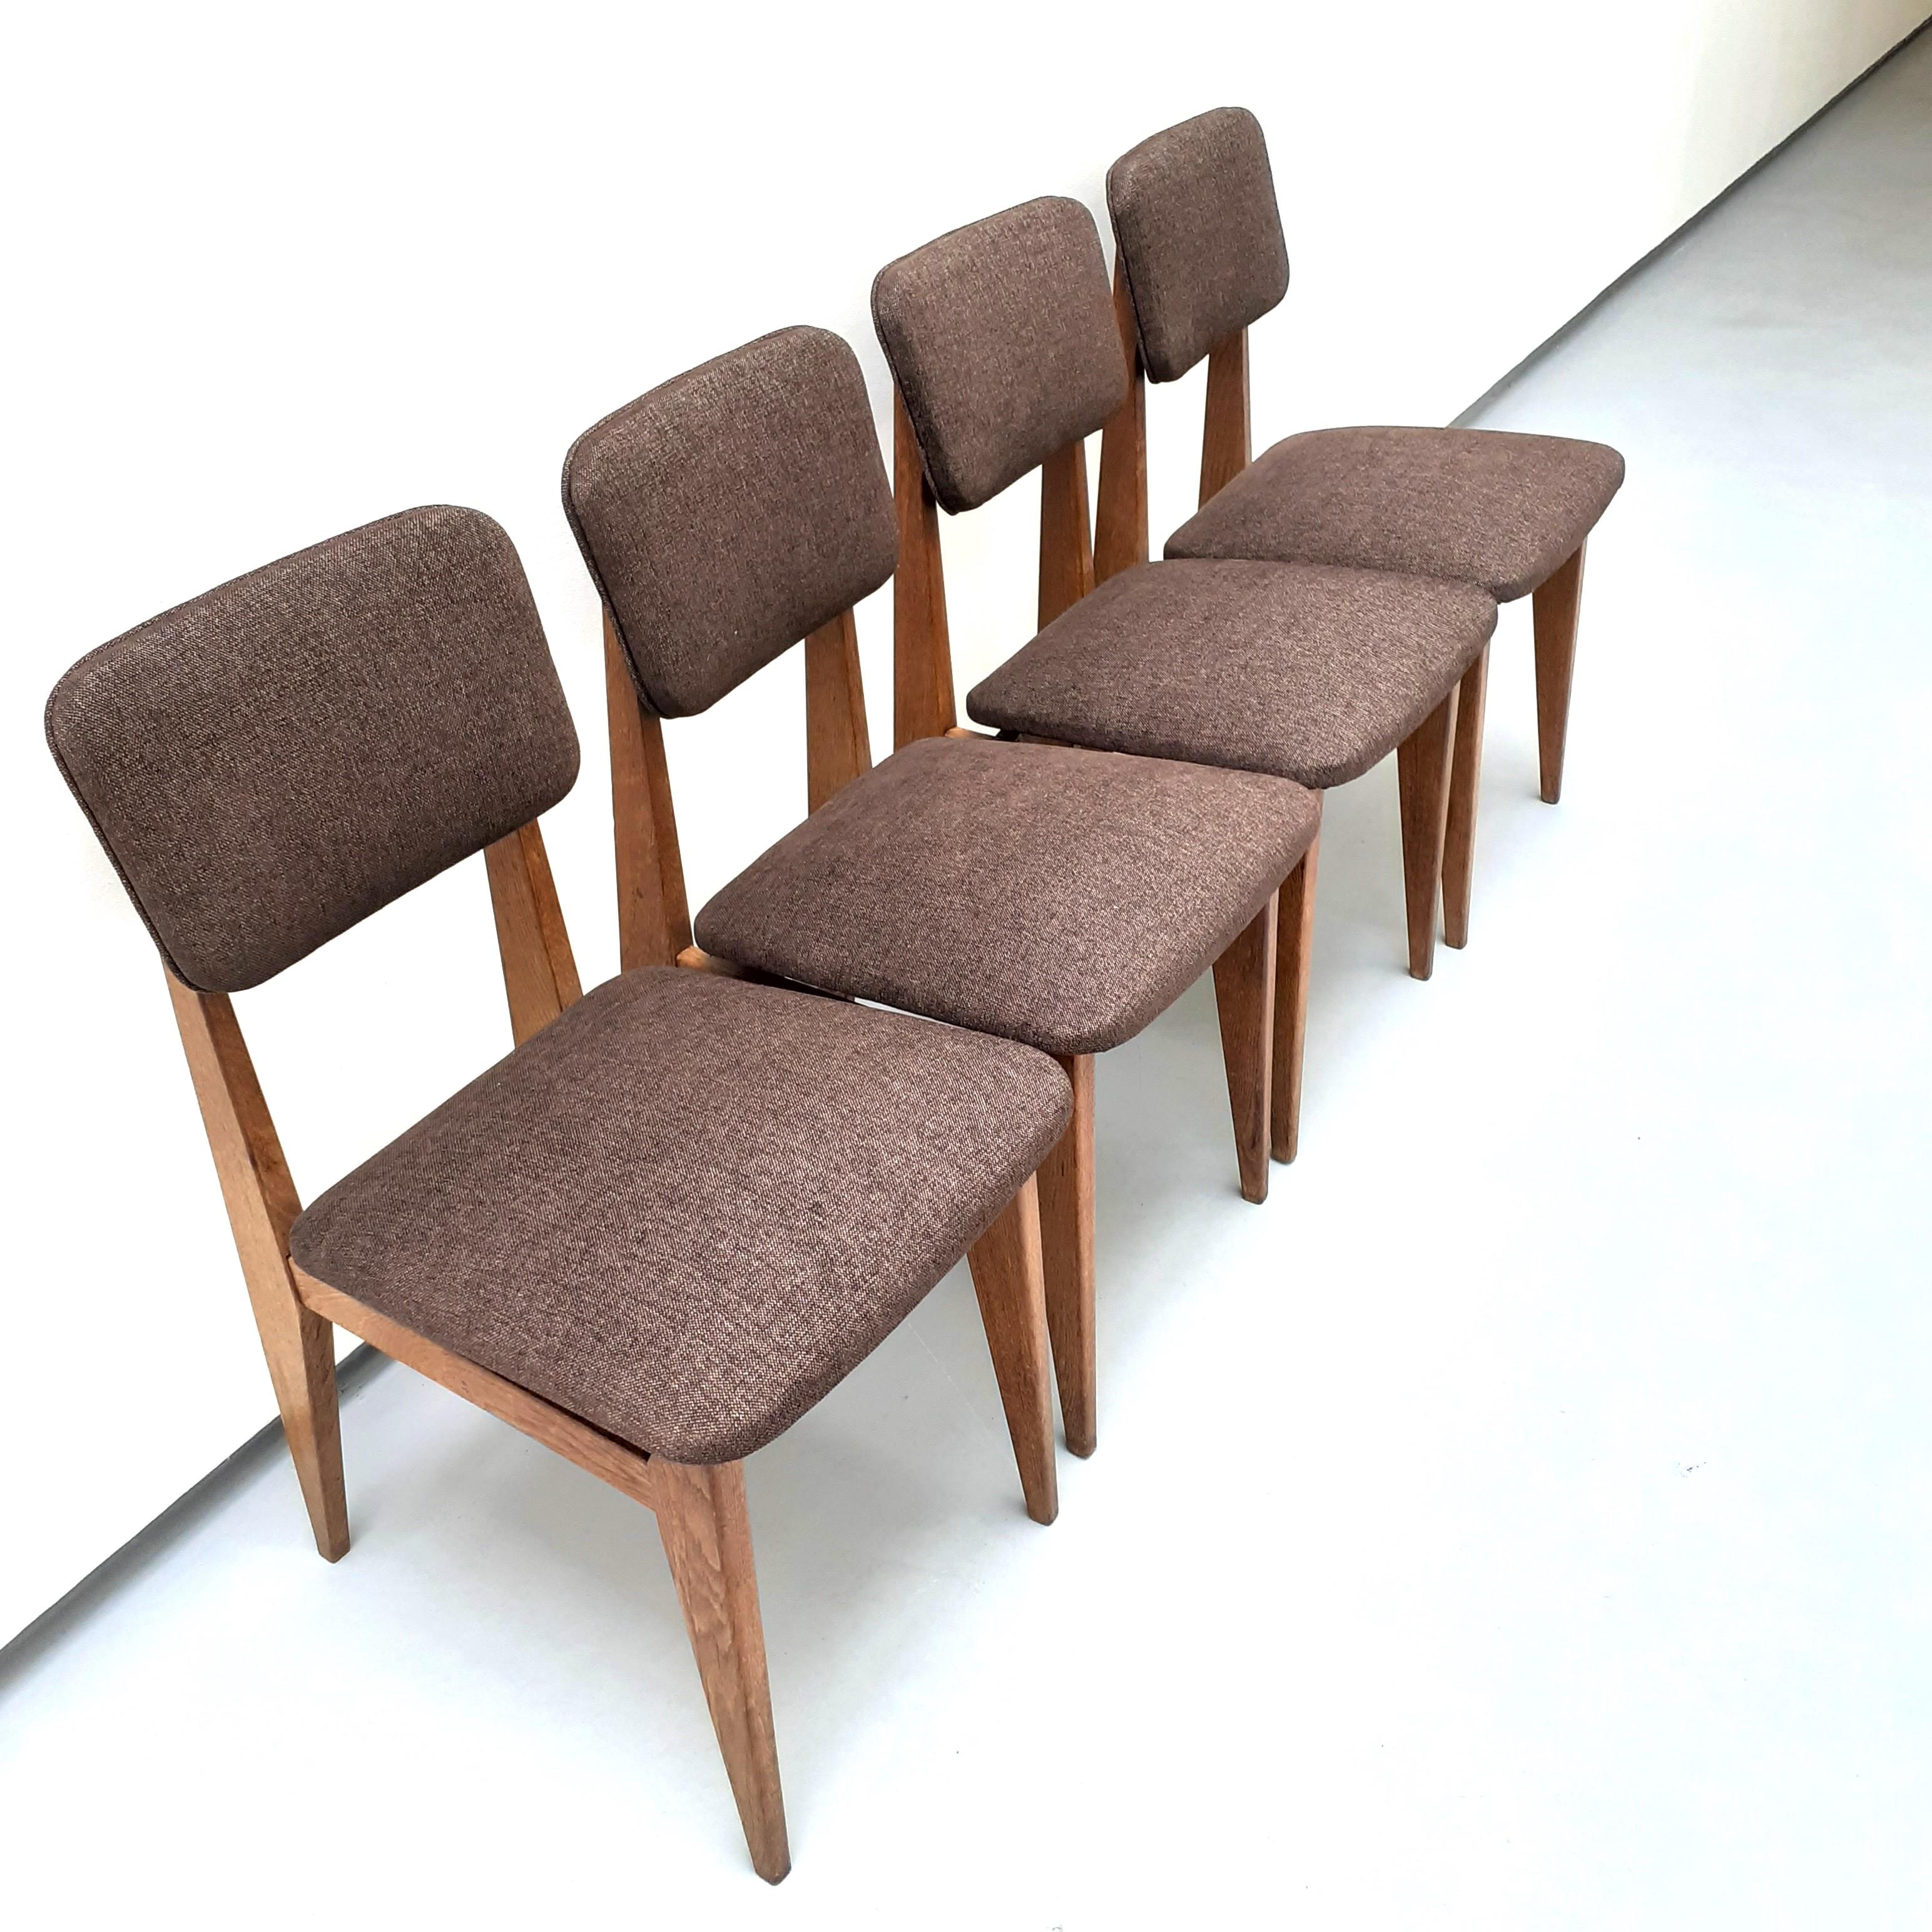 Set of 4 Wood and Fabric Chairs by Marcel Gascoin, Arhec, 1950s For Sale 1